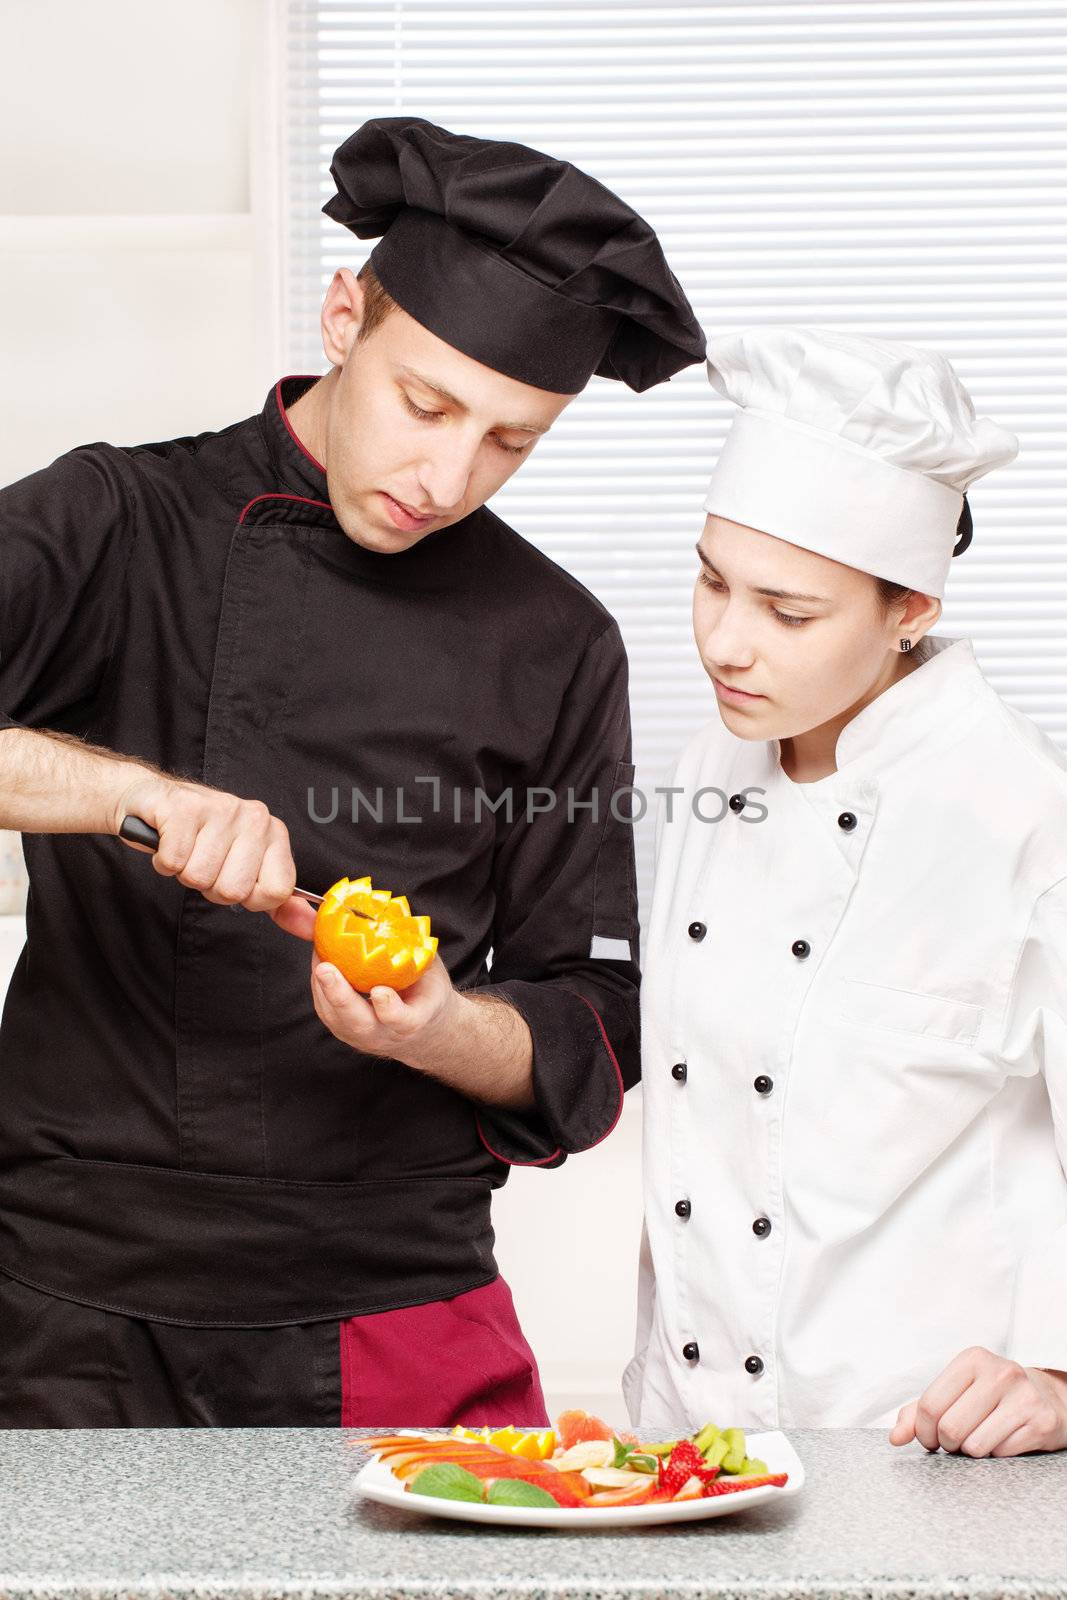 Senior chef teaches young chef to decorate fruit plate in kitchen